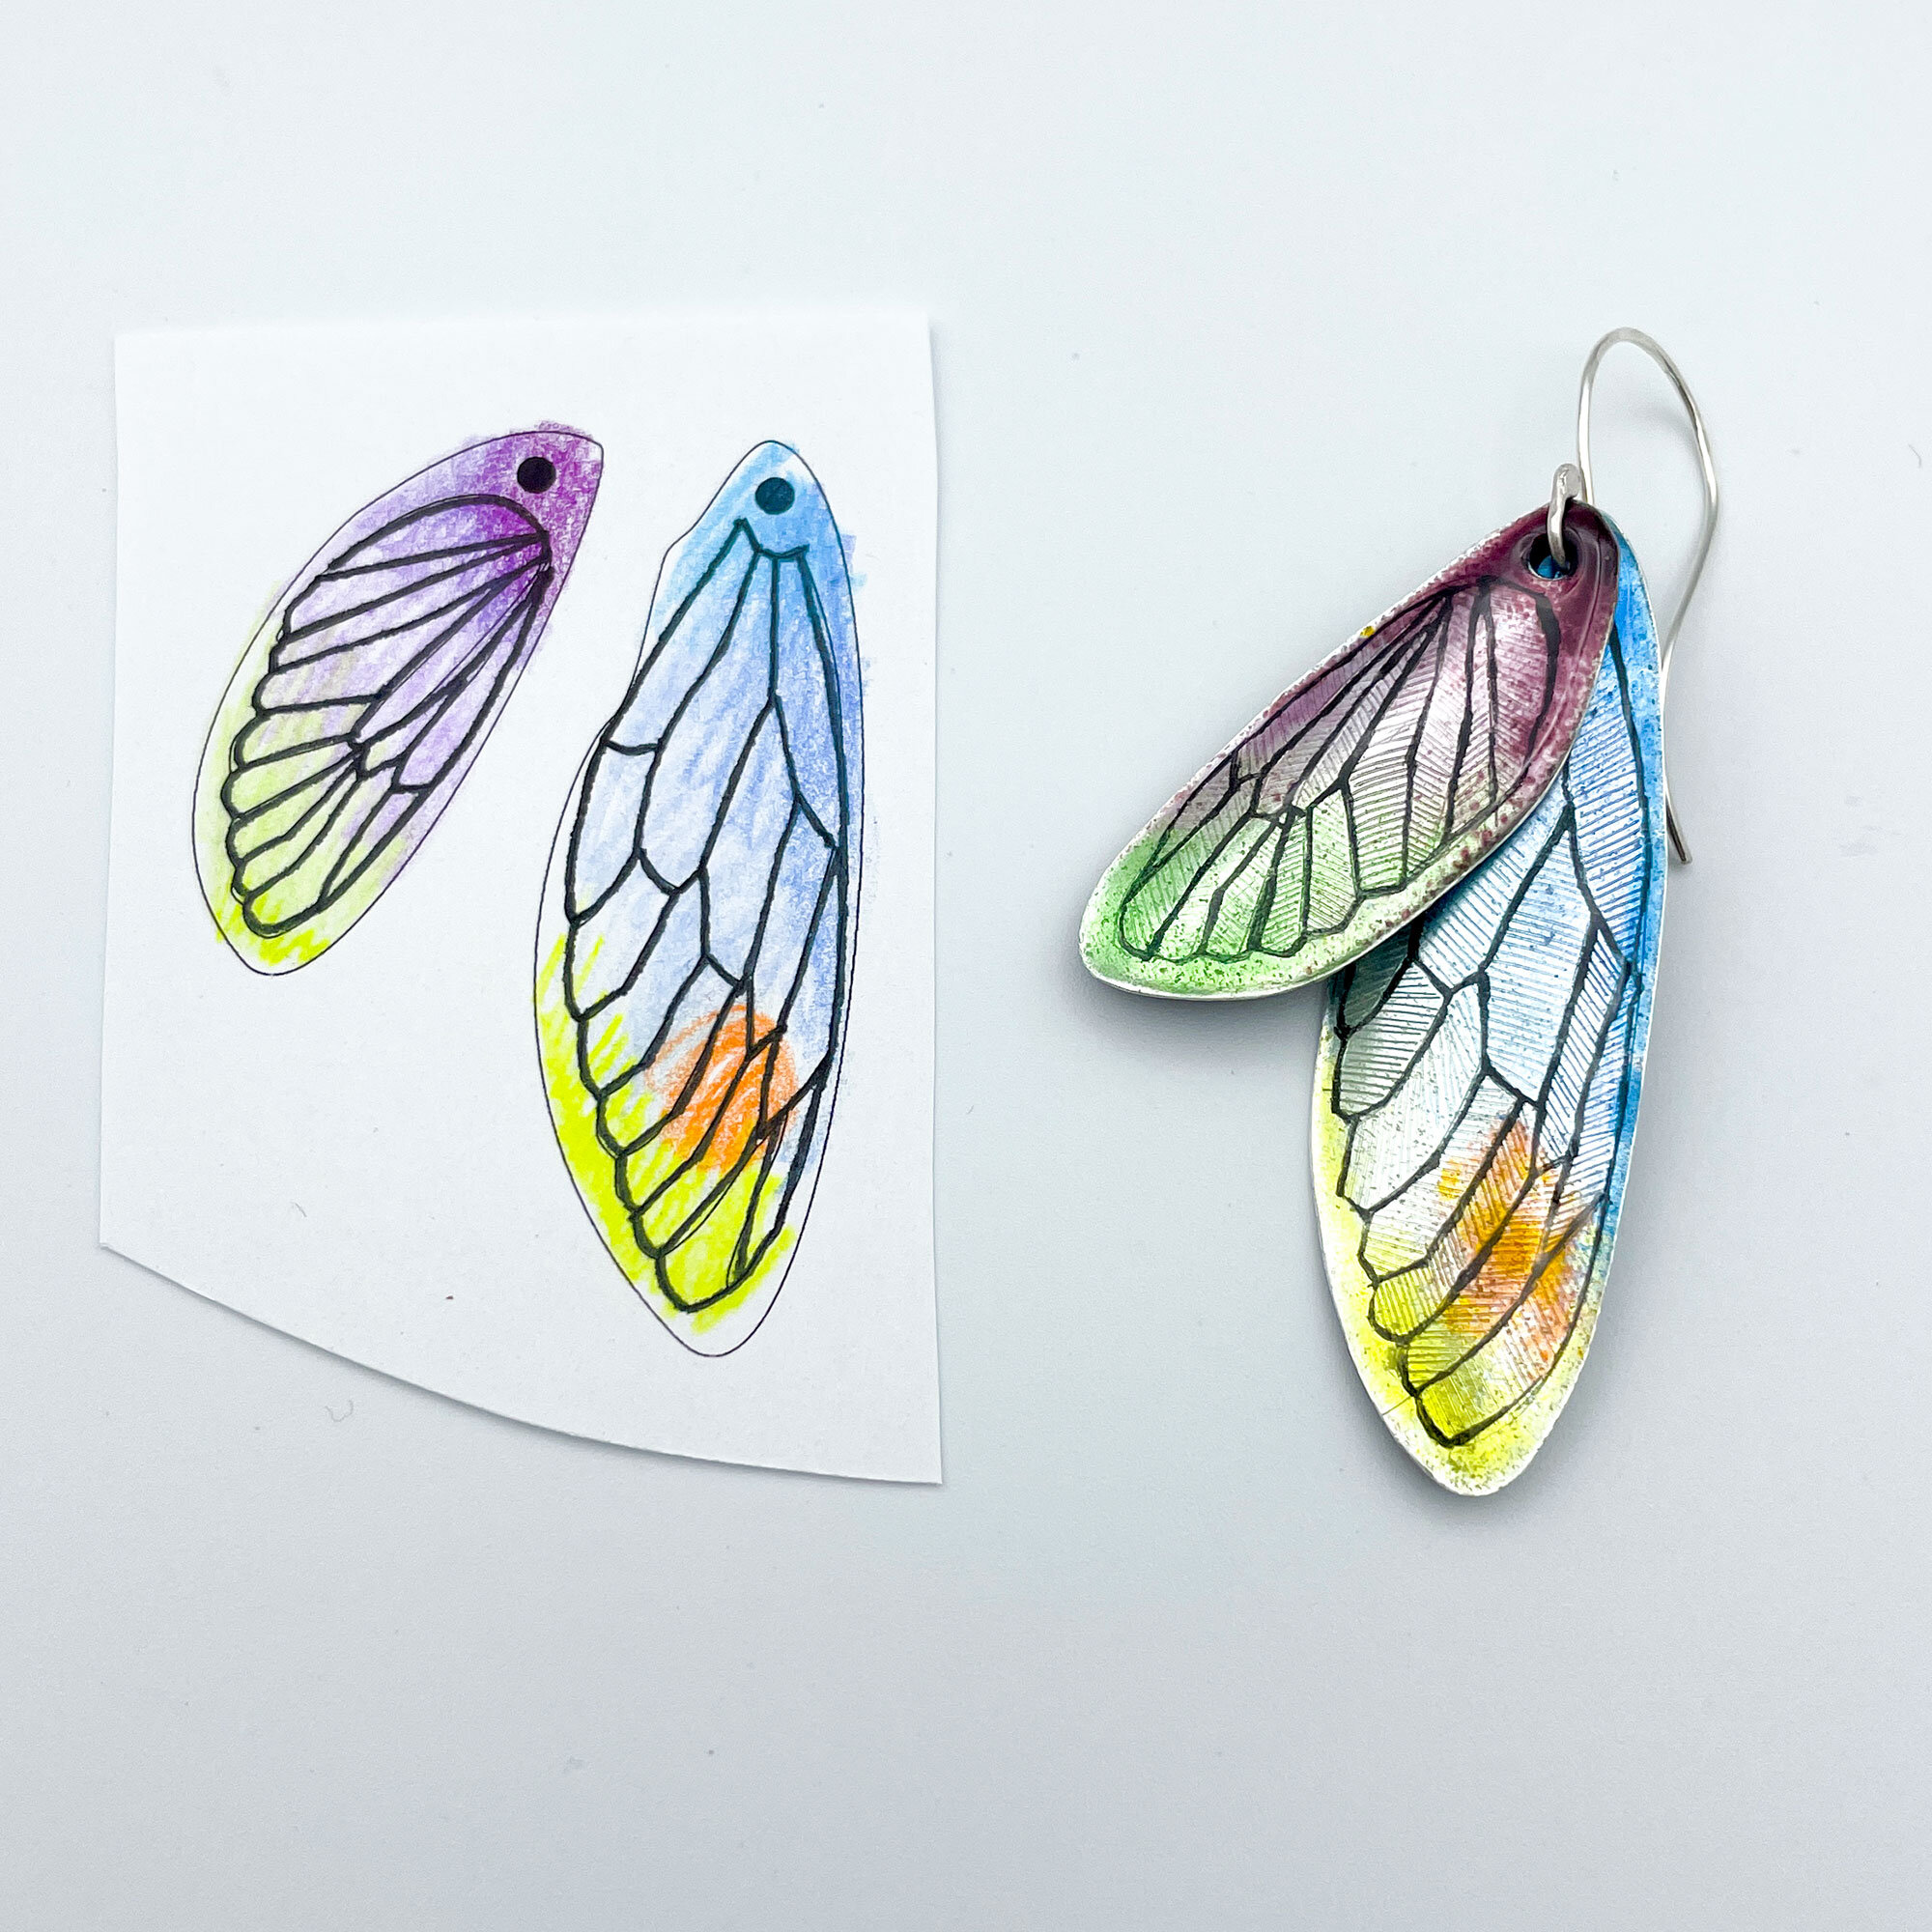 P3 Insect Wing Earrings